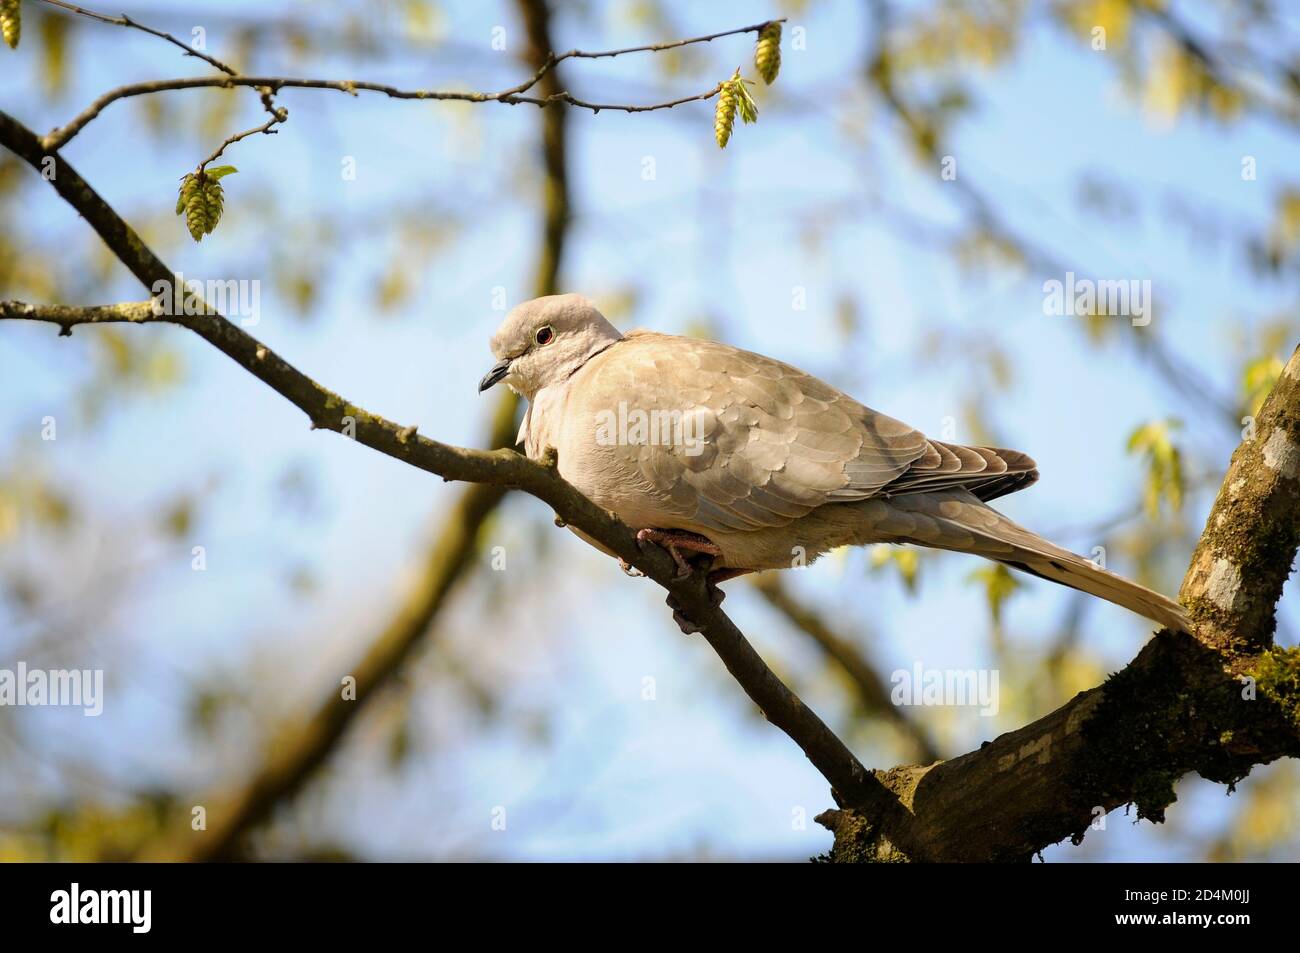 Eurasian collared dove, Streptopelia decaocto, perched on a branch. Stock Photo